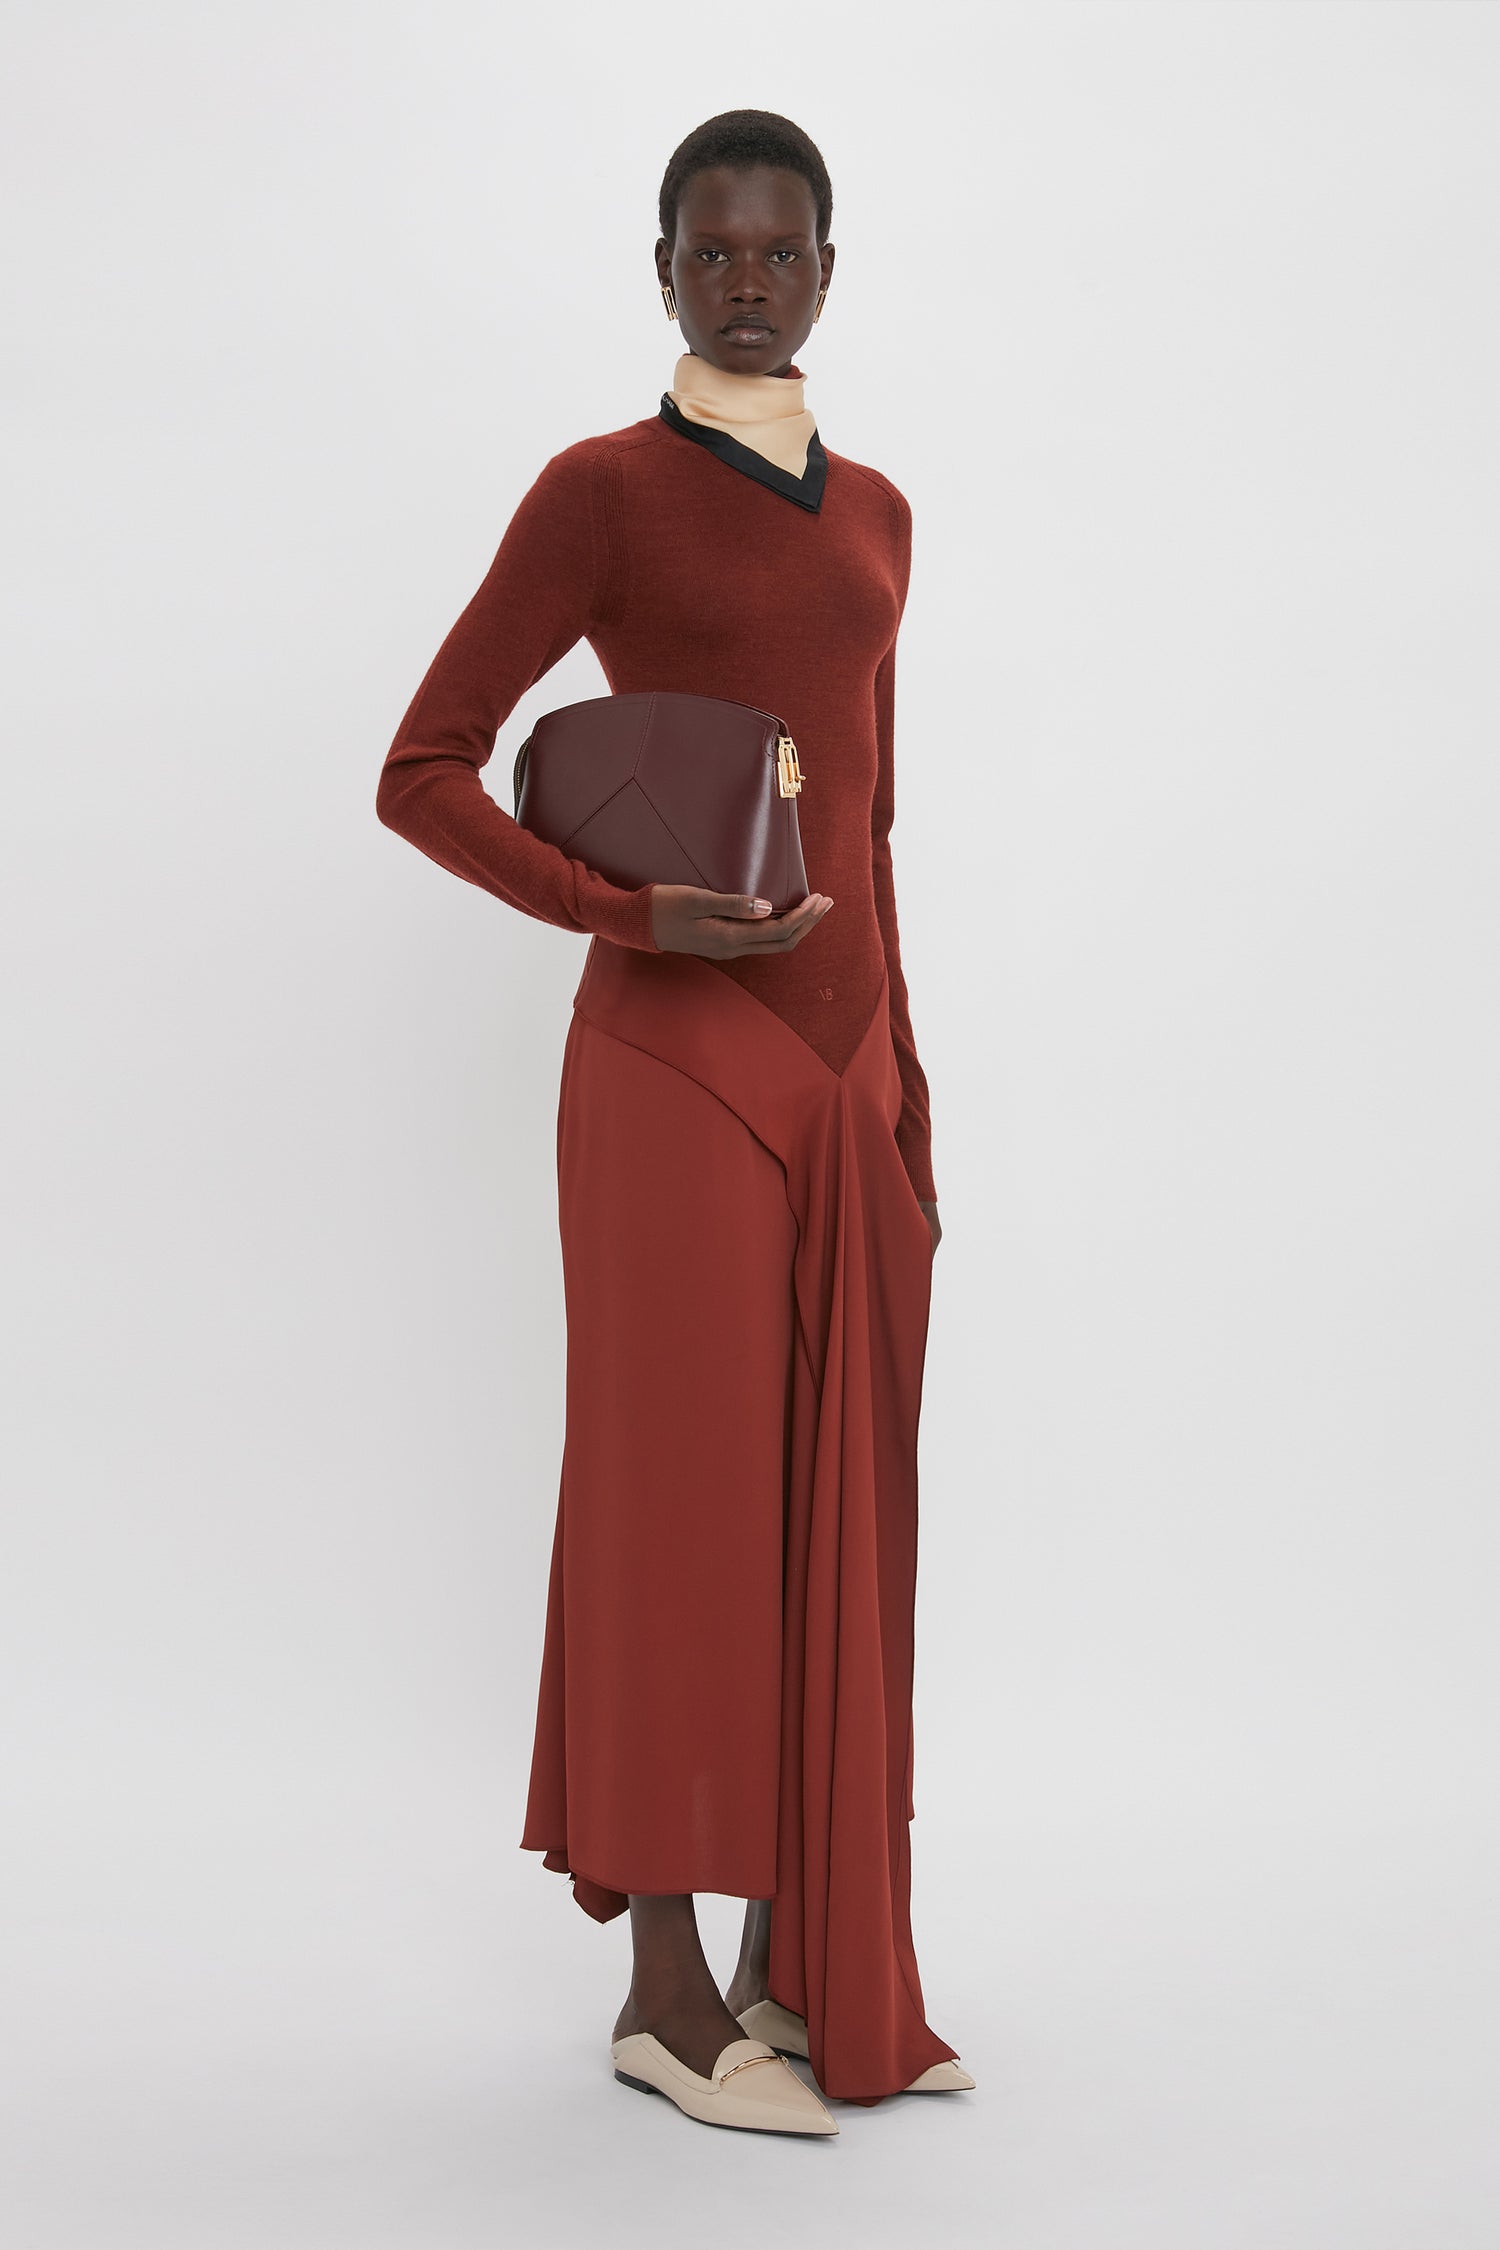 Person wearing a red long-sleeve High Neck Tie Detail Dress In Russet by Victoria Beckham, holding a dark red clutch, standing against a plain white background.